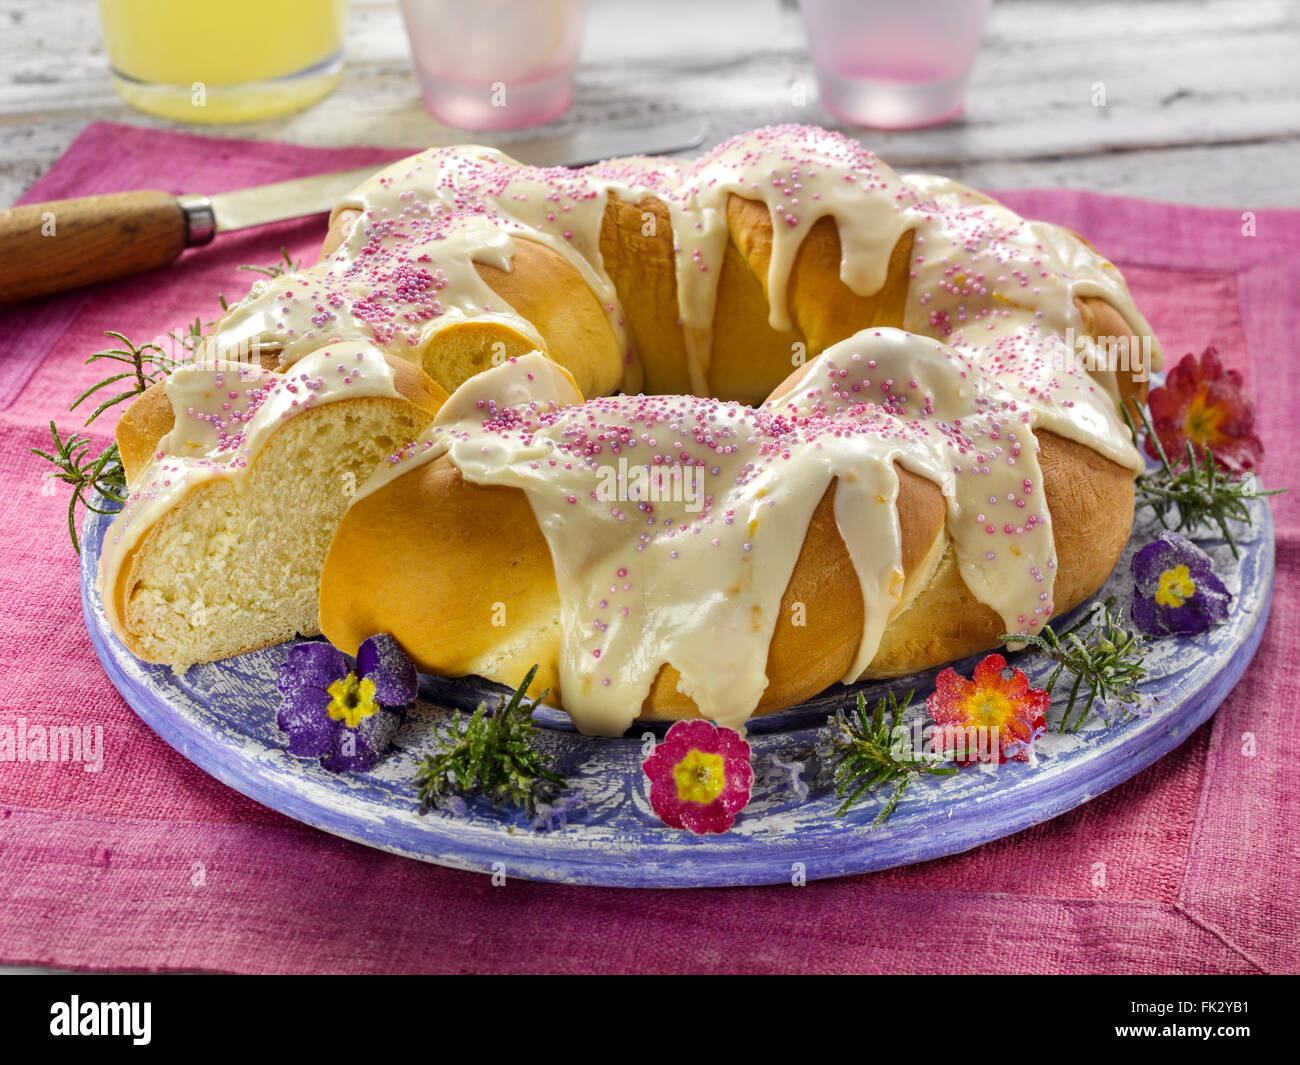 Pictures Of Braided Easter Bread 25